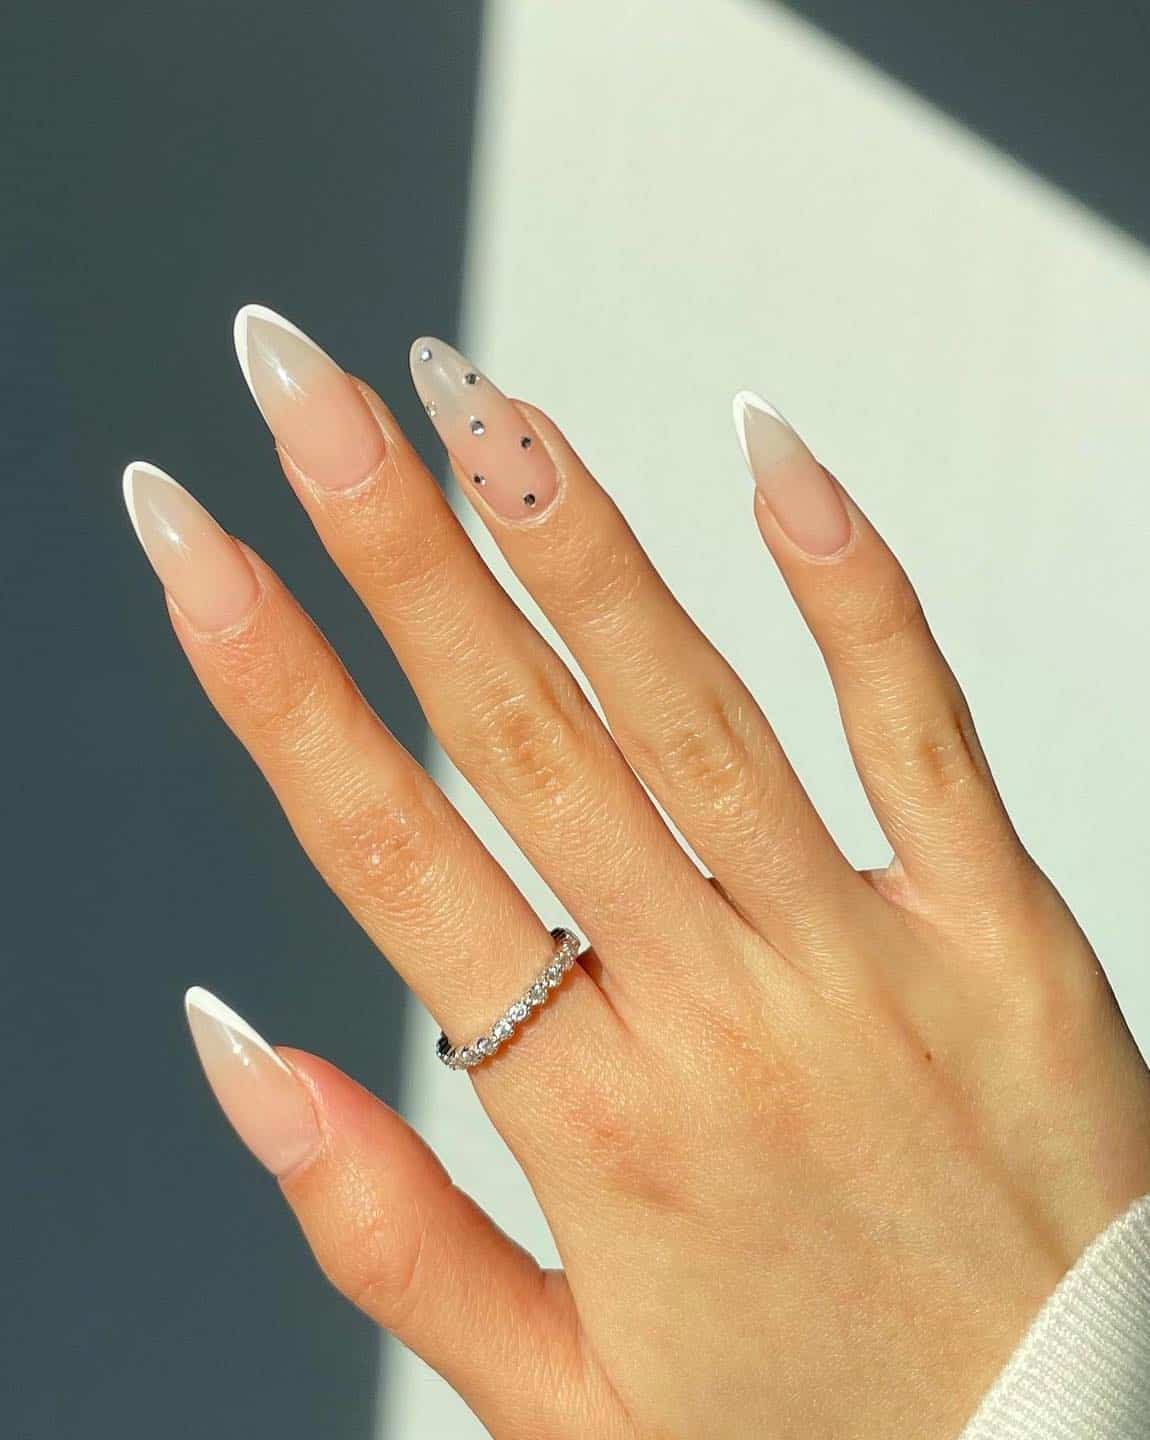 A hand with long almond nails painted with pointed white tips and a crystal accent nail